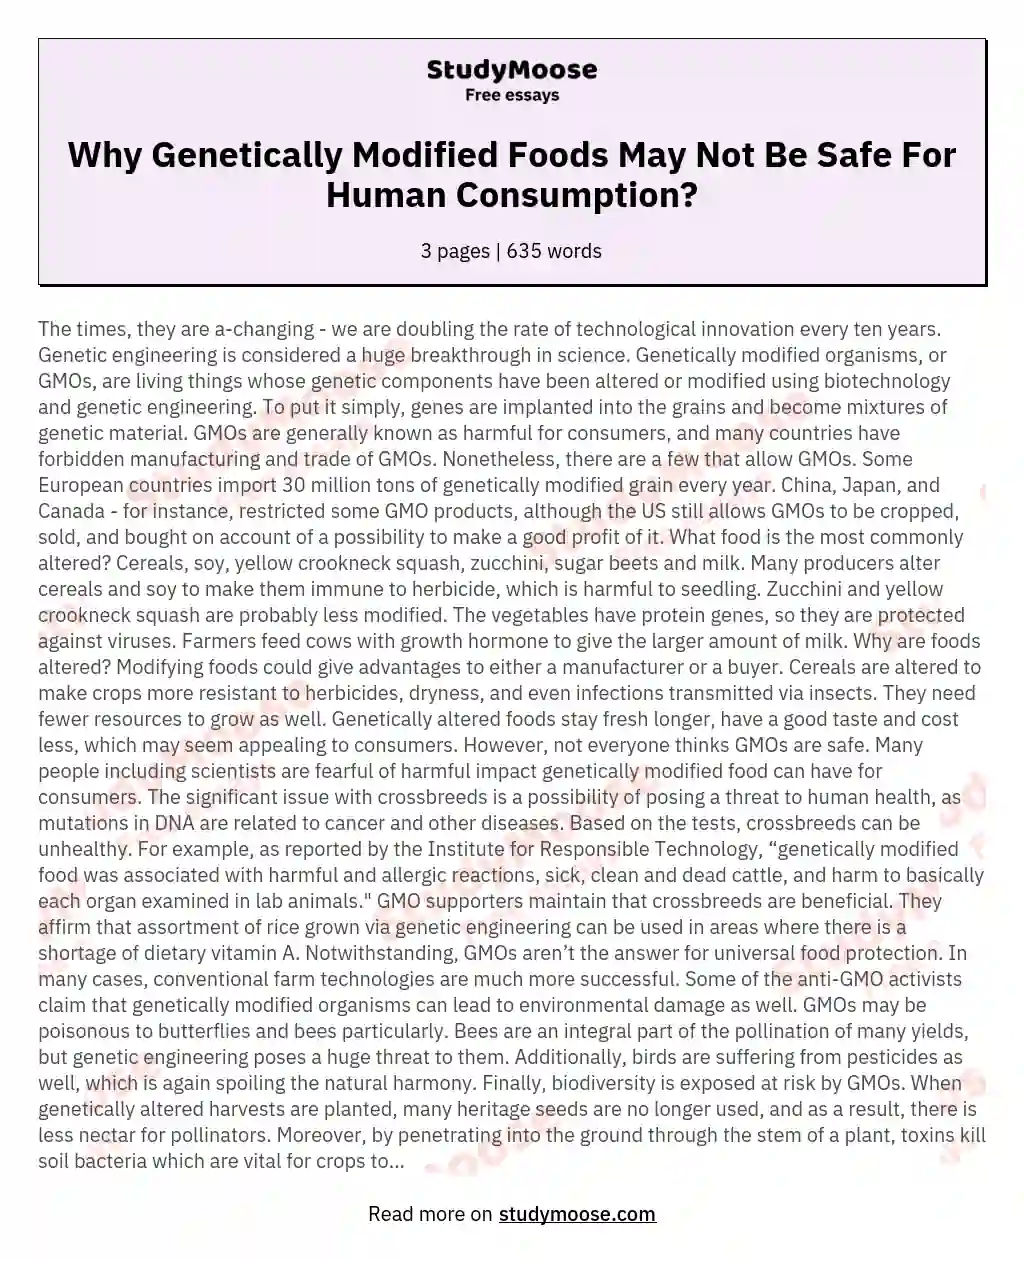 essay about why genetically modified food is bad